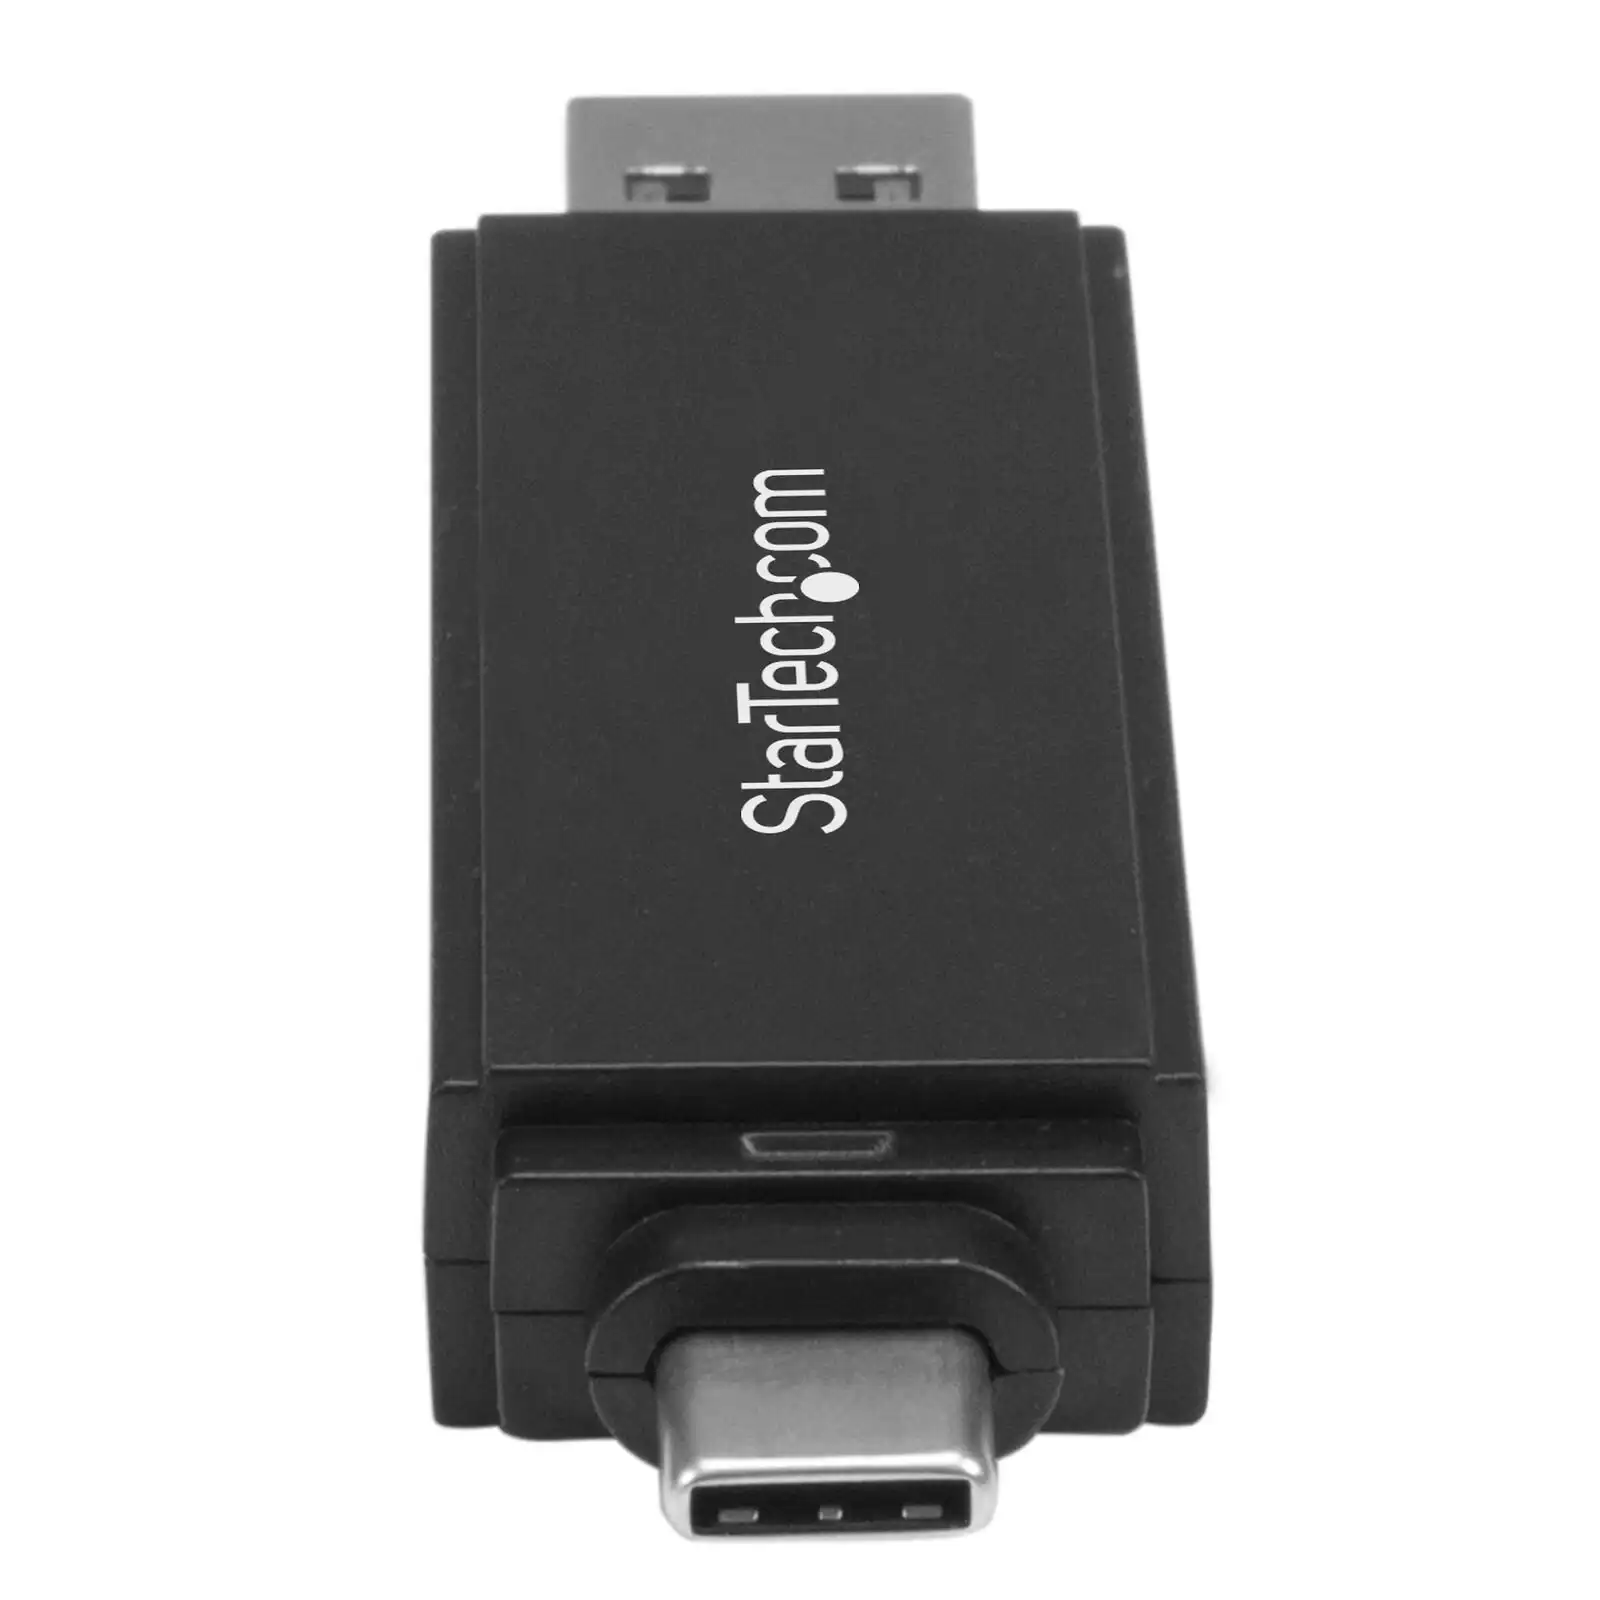 Star Tech SD/Micro SD Memory Card Reader for Mobile Smartphones/Computer/Tablet